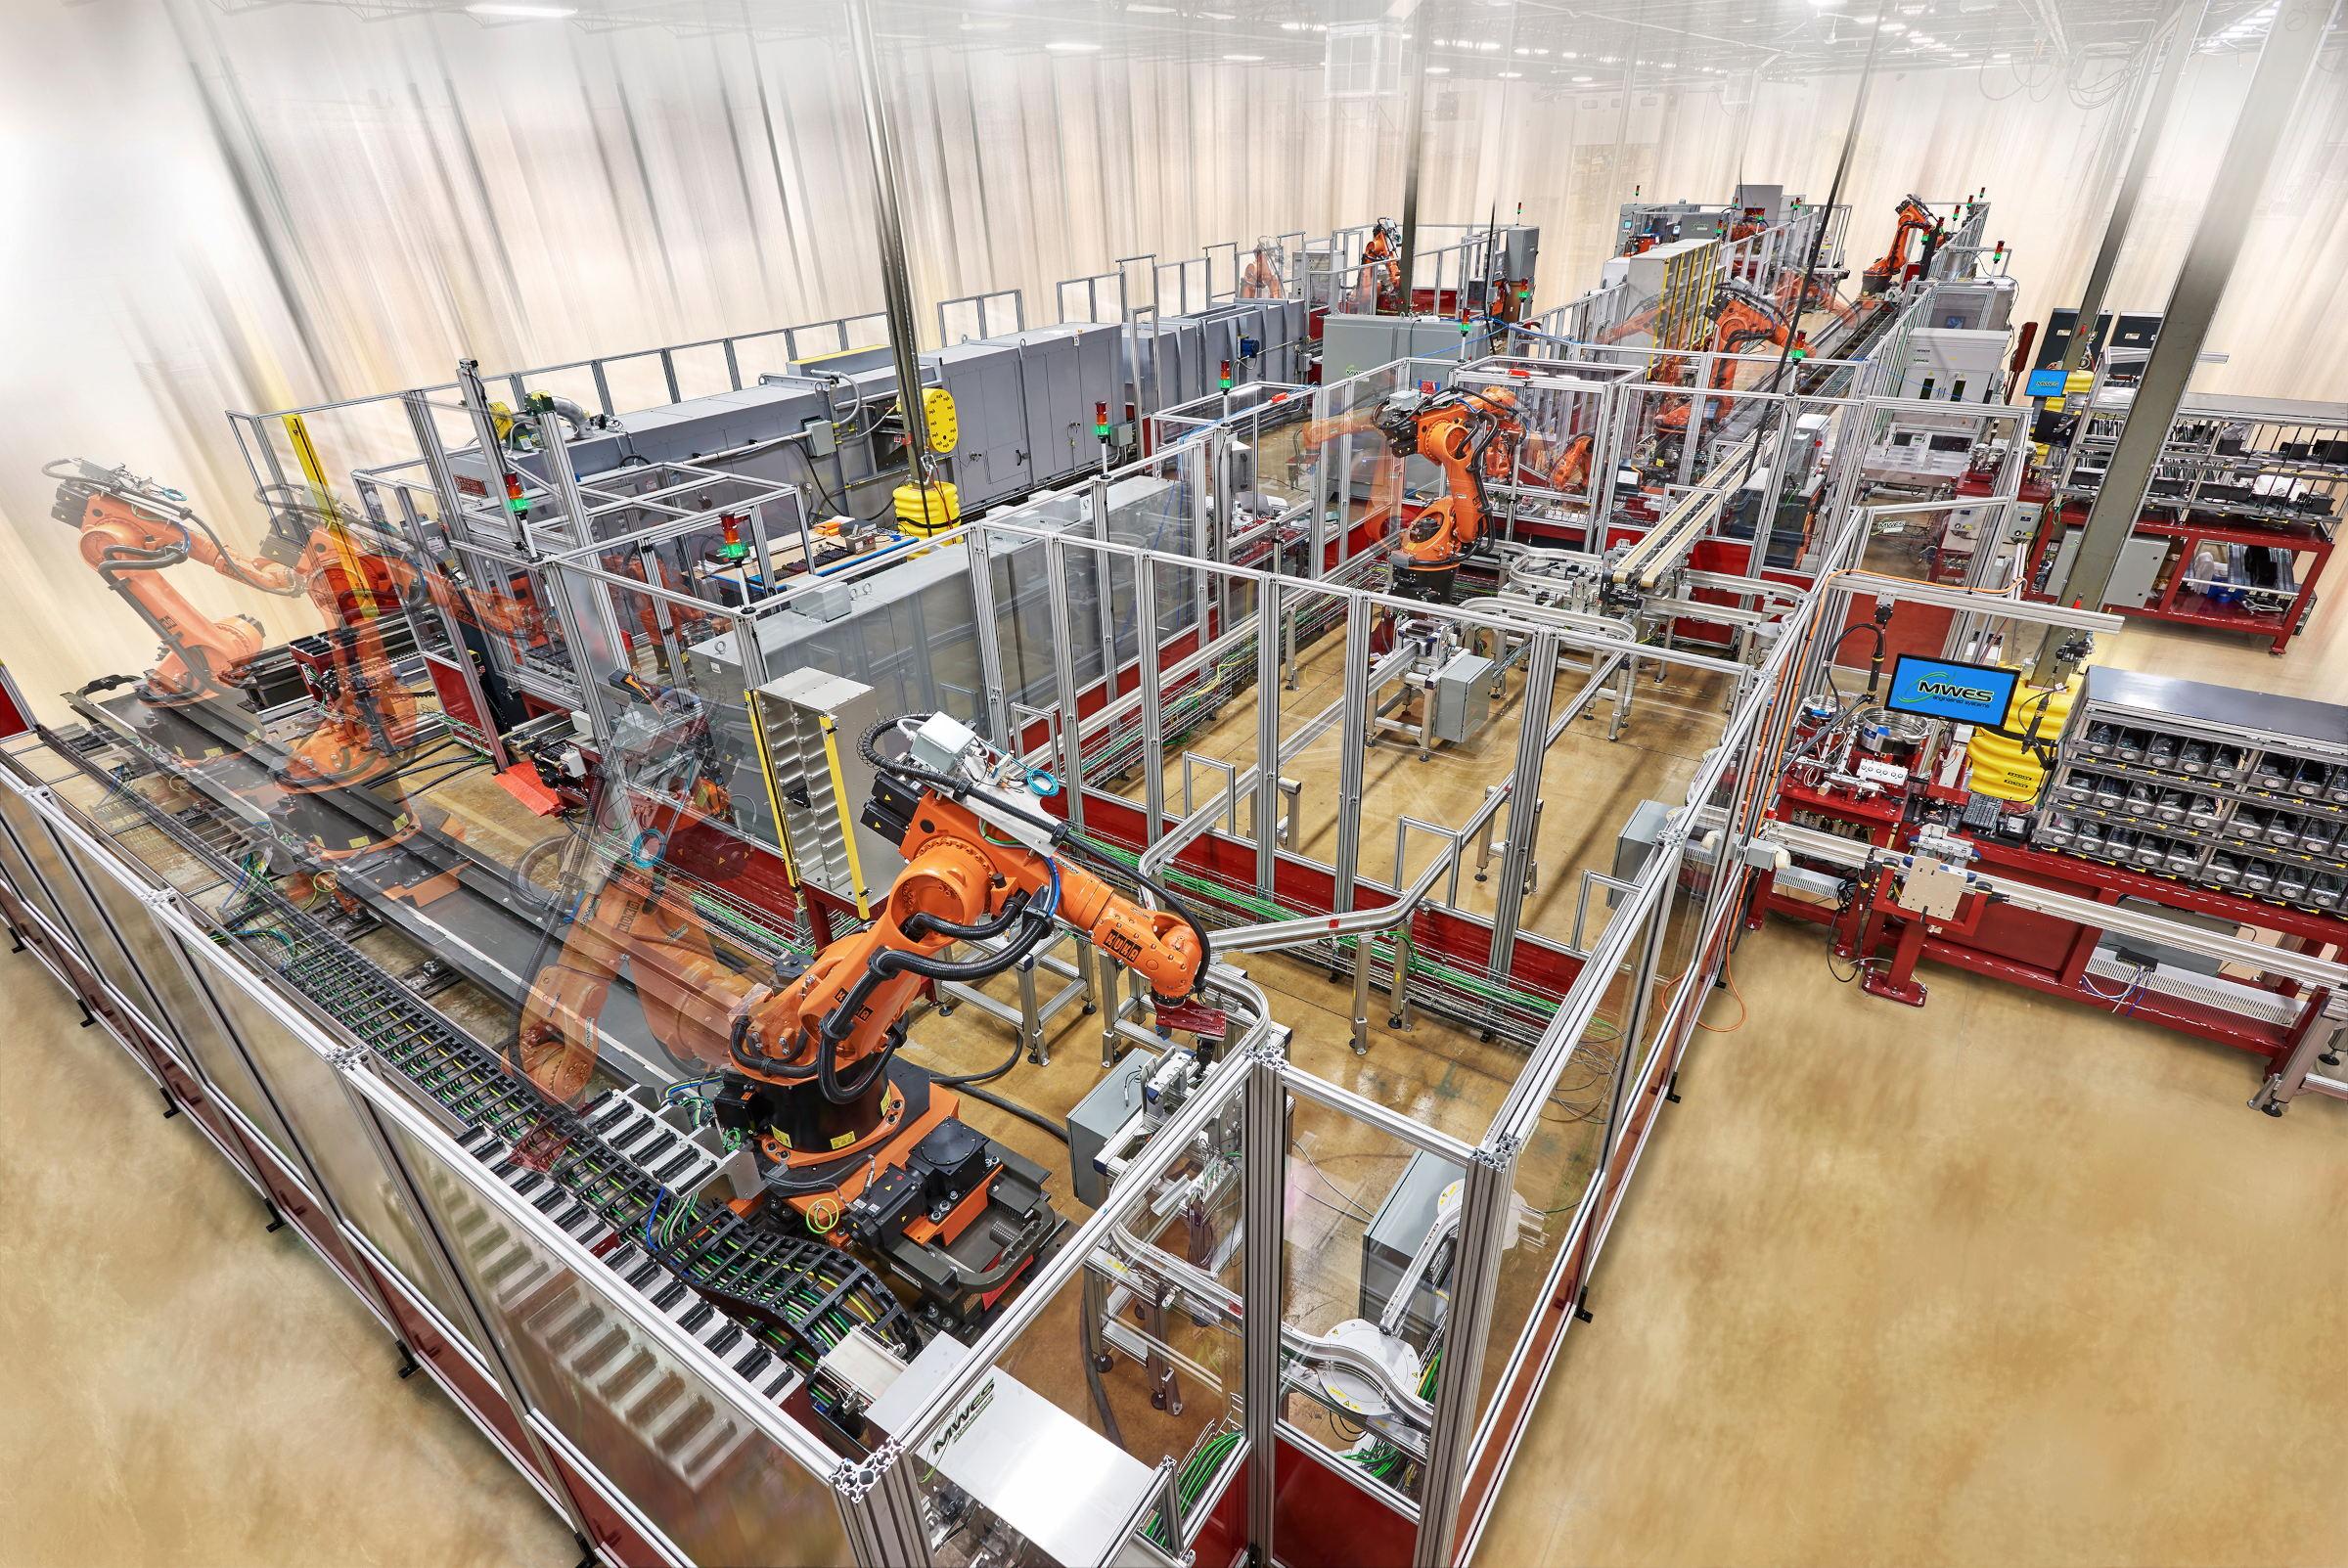 Image for Full Production Line Automation | Midwest Engineered Systems